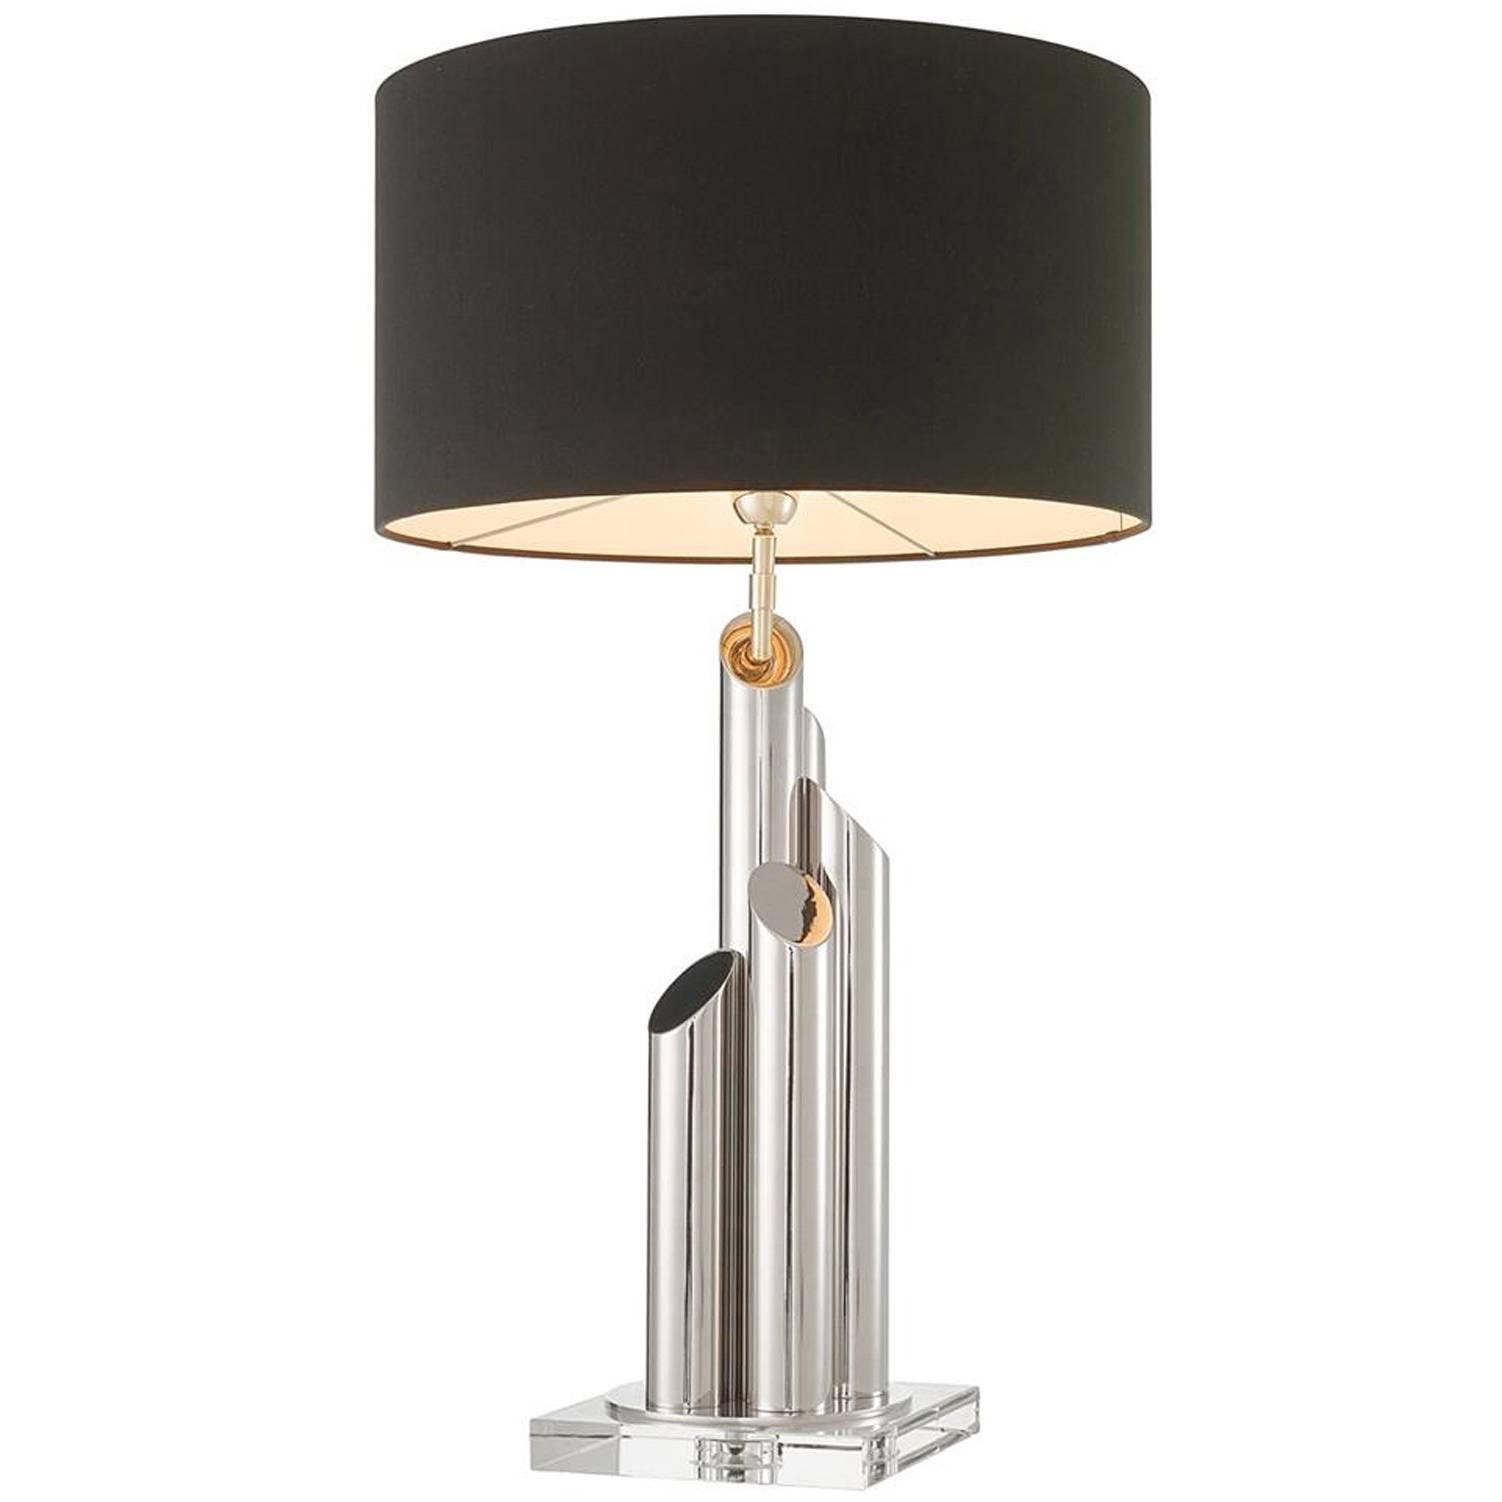 Tubes Nickel Table Lamp in Nickel Finish on Crystal Glass Base